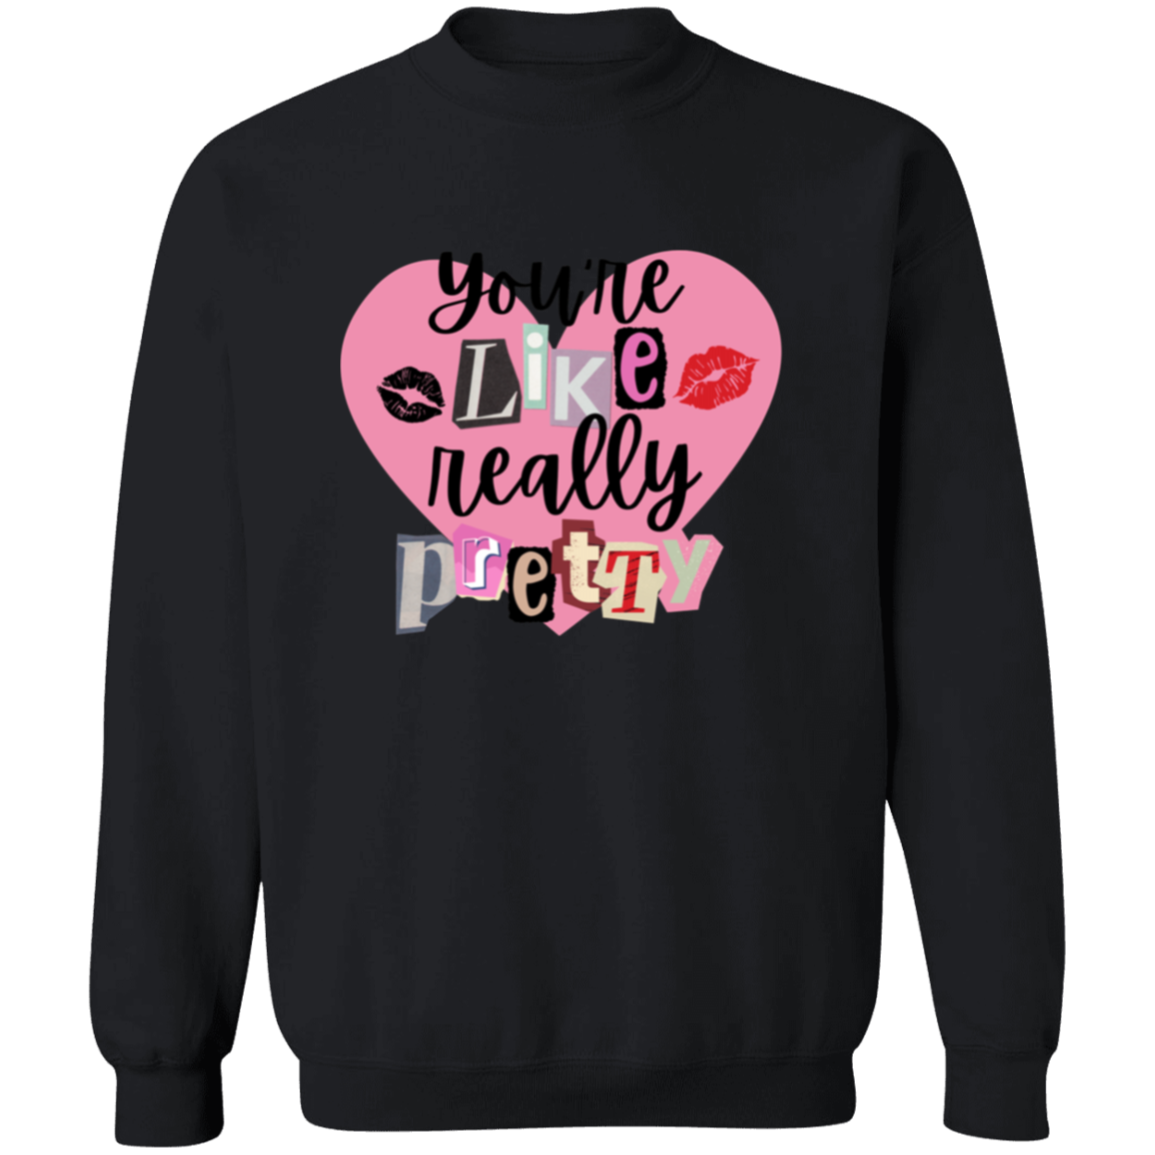 You're Like Really Pretty Crewneck Sweater, Magazine Lettering